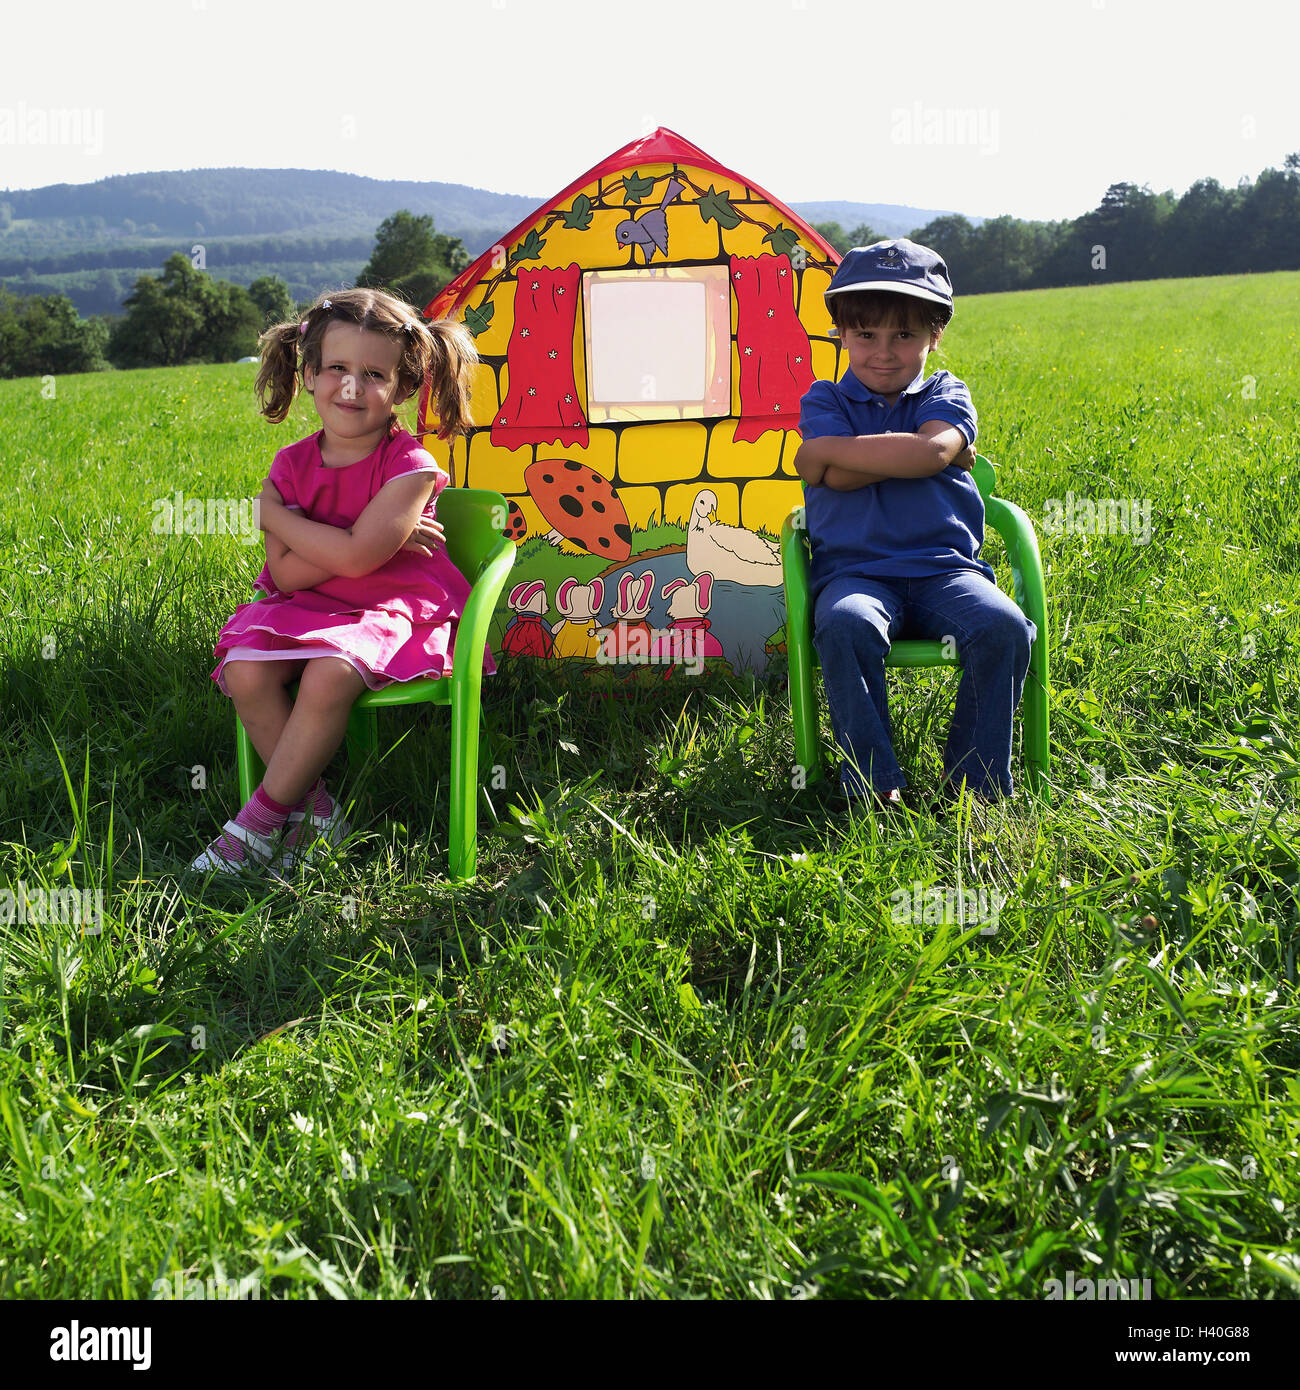 Meadow, children-game house, children, sit, chairs, arms, crosses, 4 years, siblings, boy, girl, friends, sulk, play fight, difference, distance, distance, childhood, tent, house, brightly, colourfully, icon, own home, security, security, Eigenheim-Kredit Stock Photo